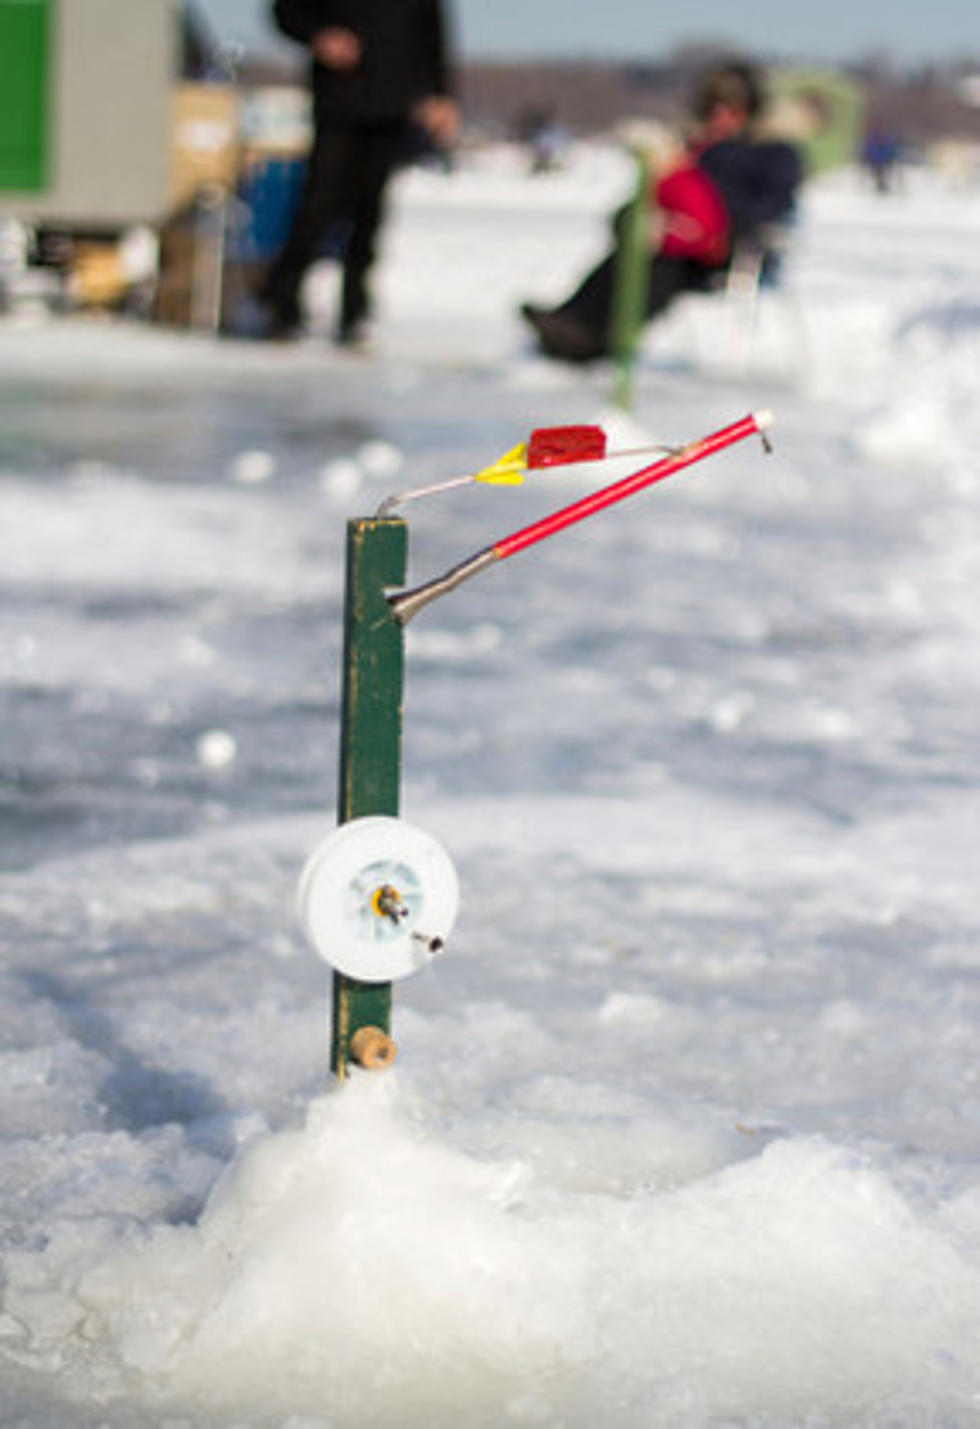 Conners-Emerson Ice Fishing Derby Cancelled